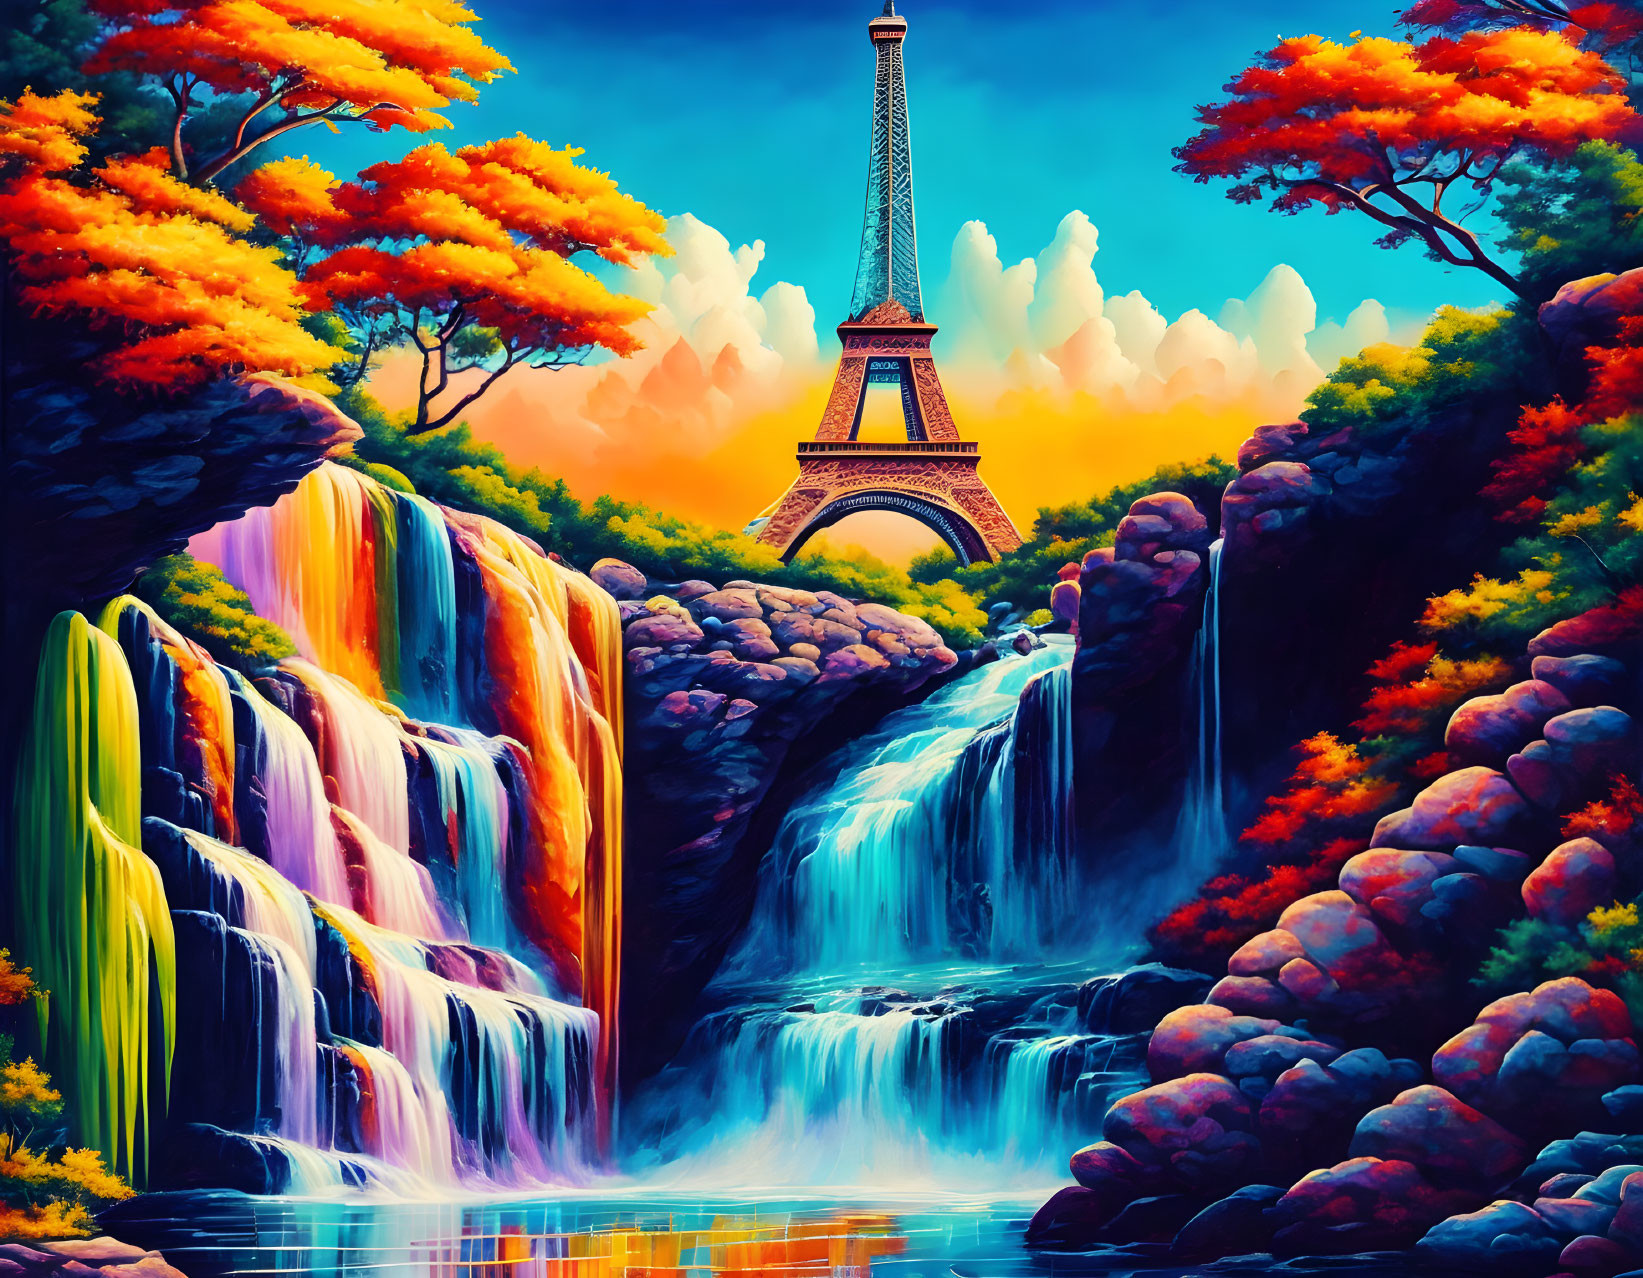 Surreal landscape with Eiffel Tower, colorful trees, waterfalls, and lake